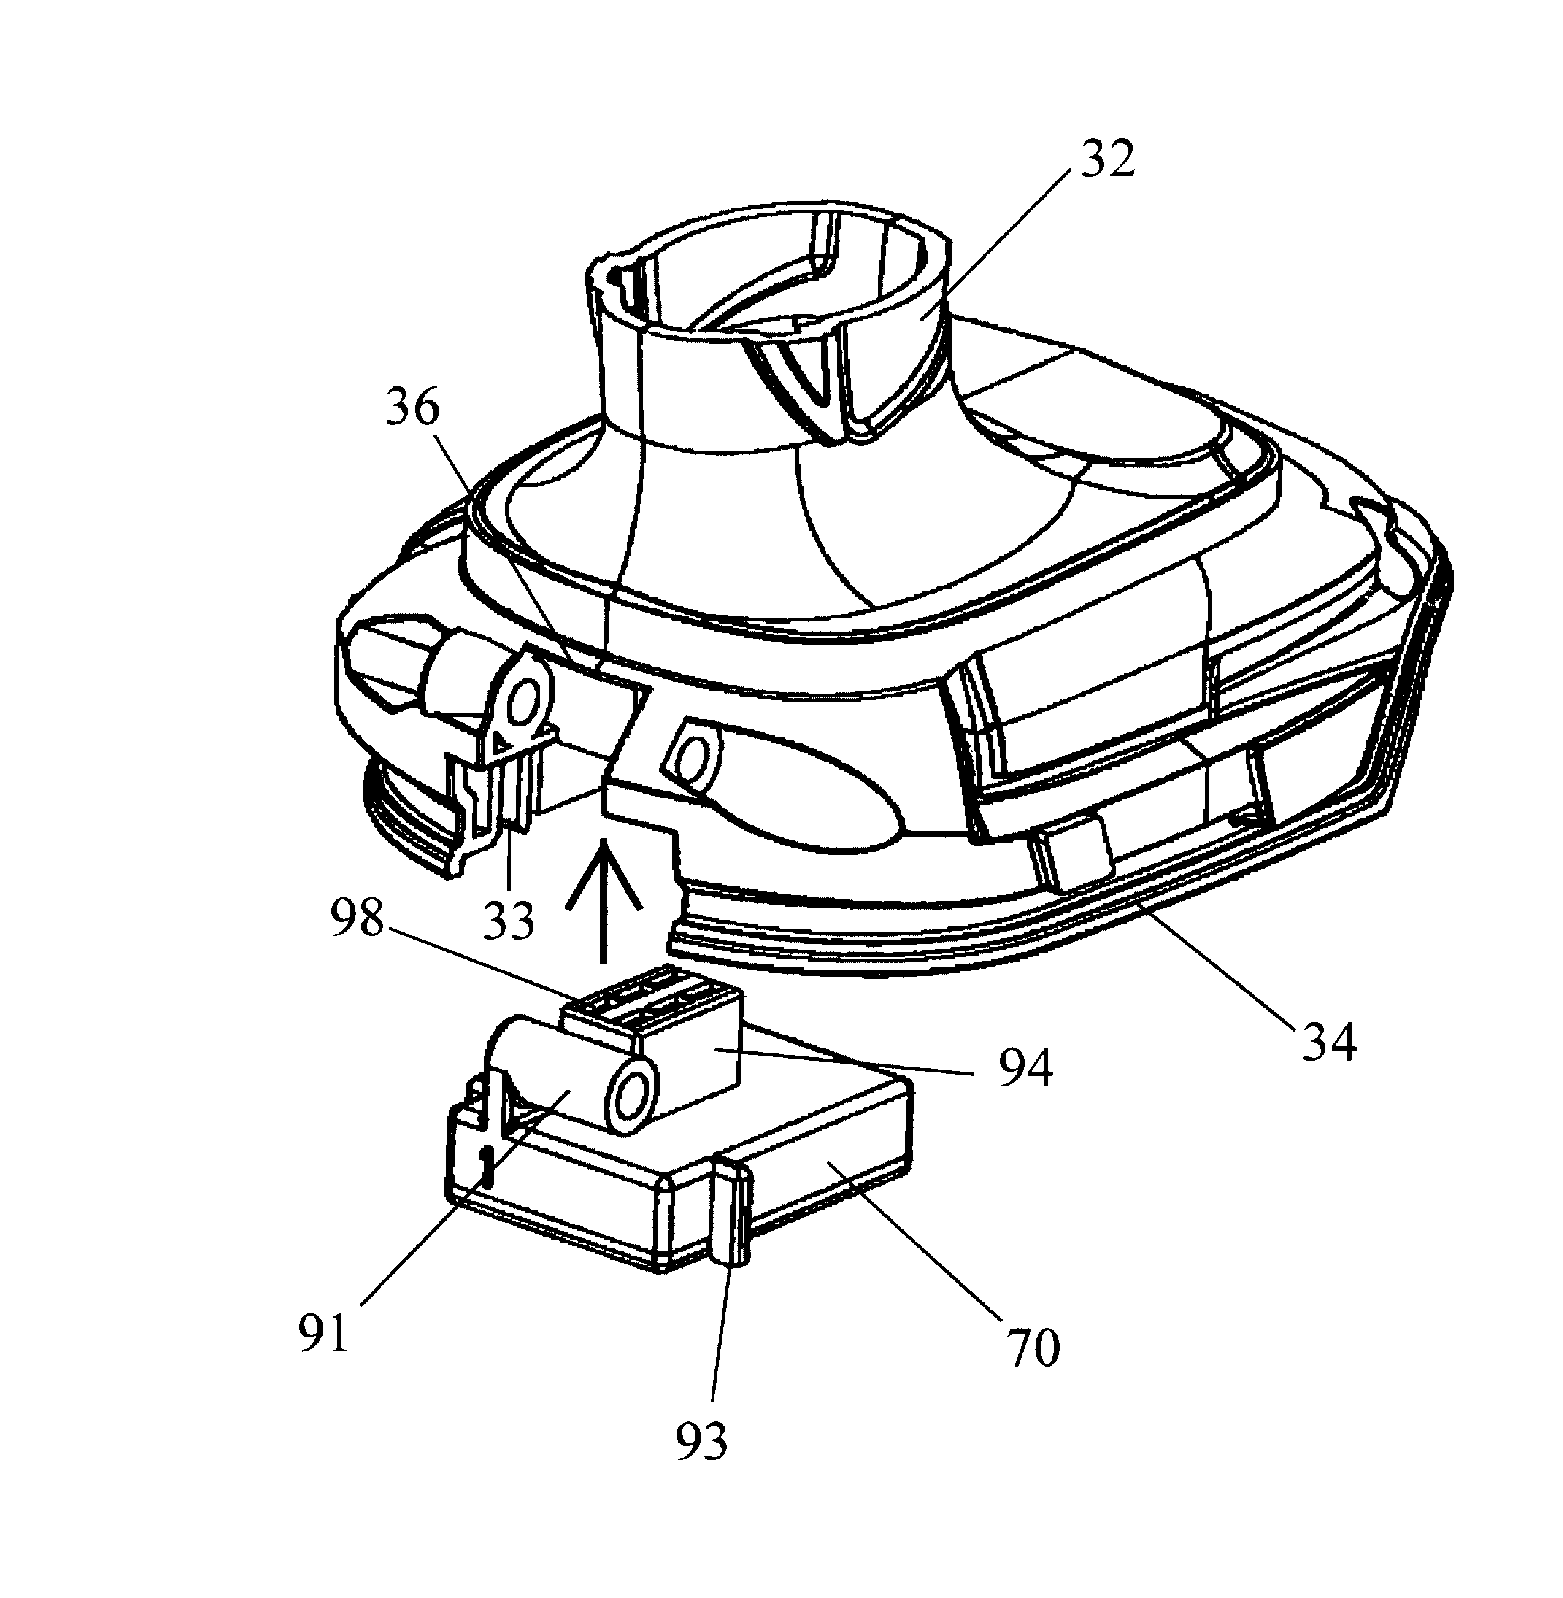 Power tool system and adapter therefor